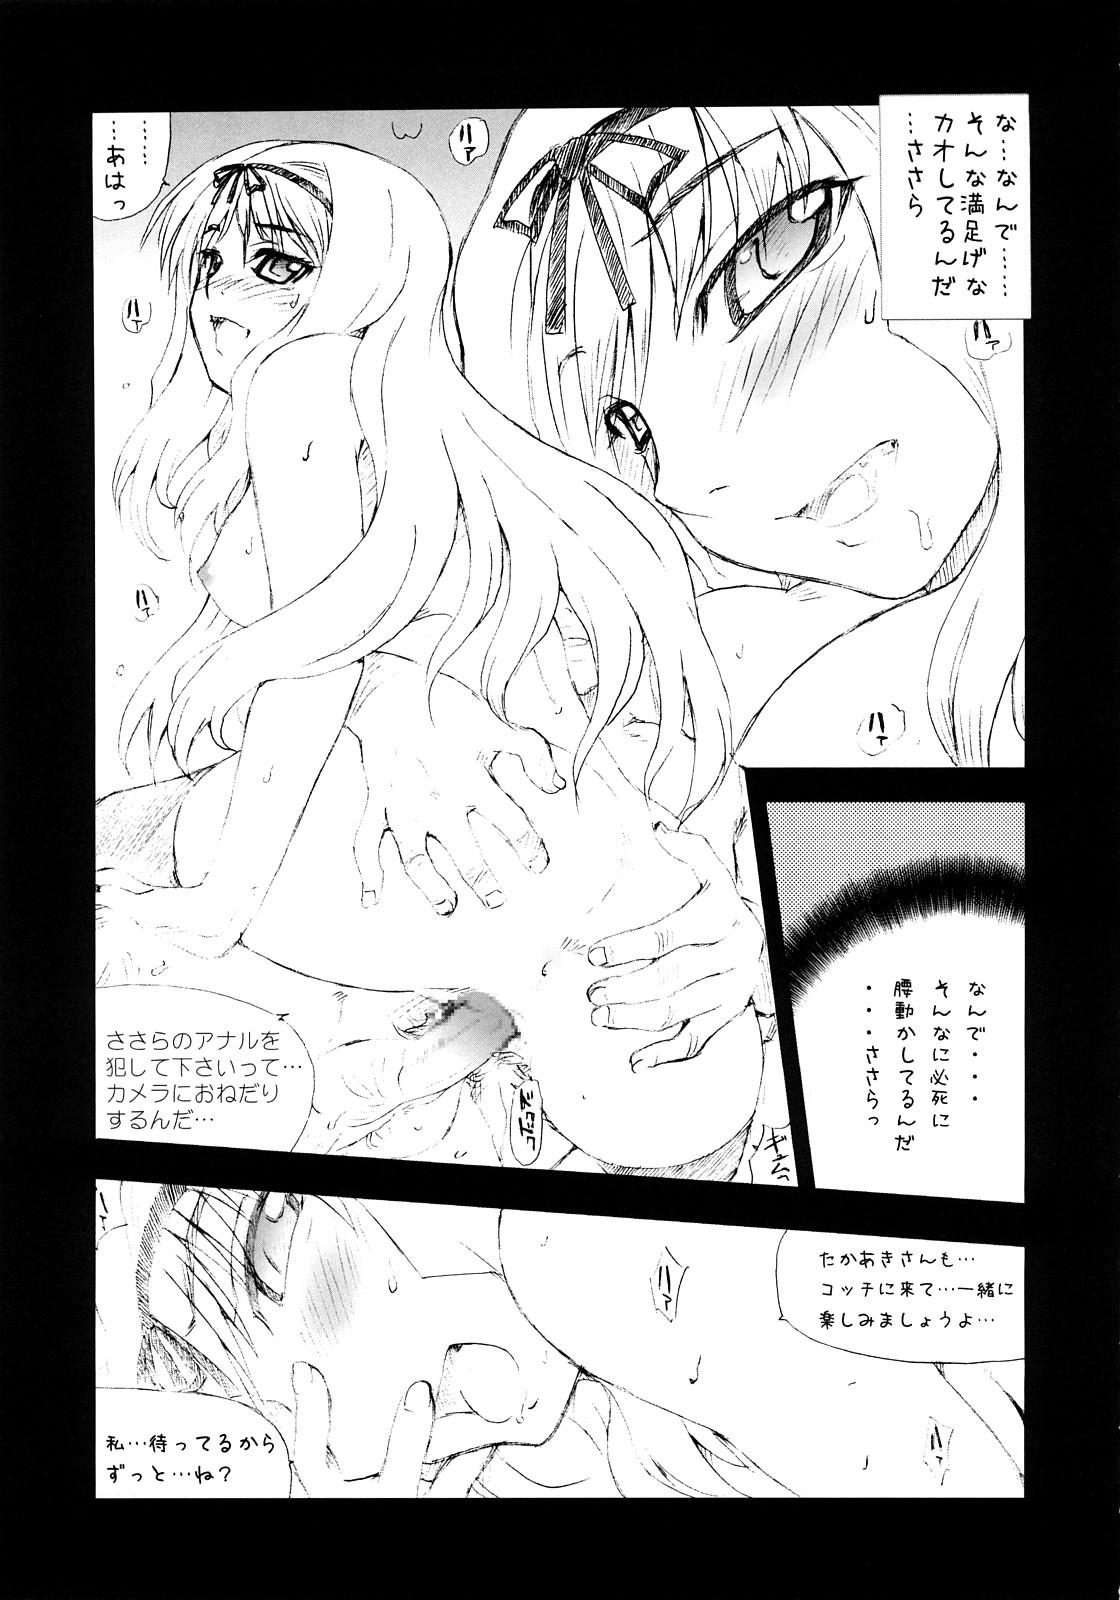 Ink Kaicyo ver. 1.0 - Toheart2 Free Hard Core Porn - Page 24